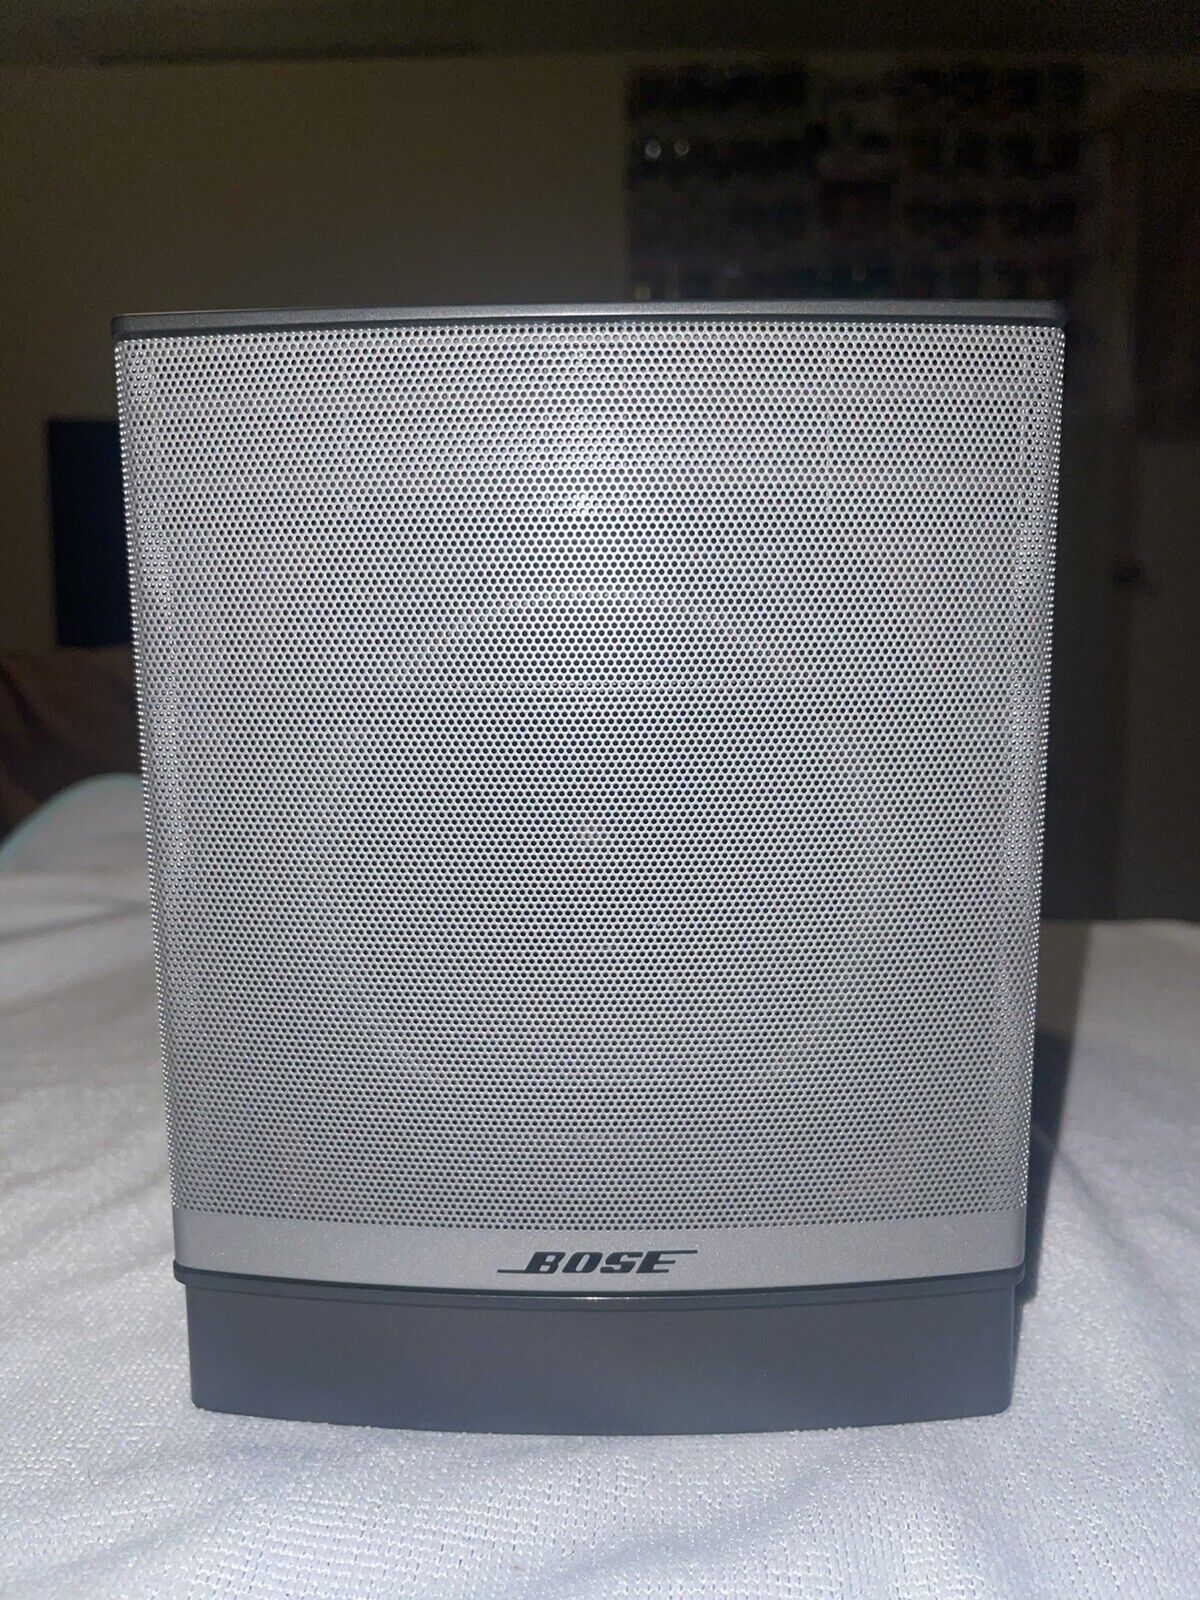 Bose Companion 3 Series II Subwoofer ONLY with AC Cord and AUX Cable